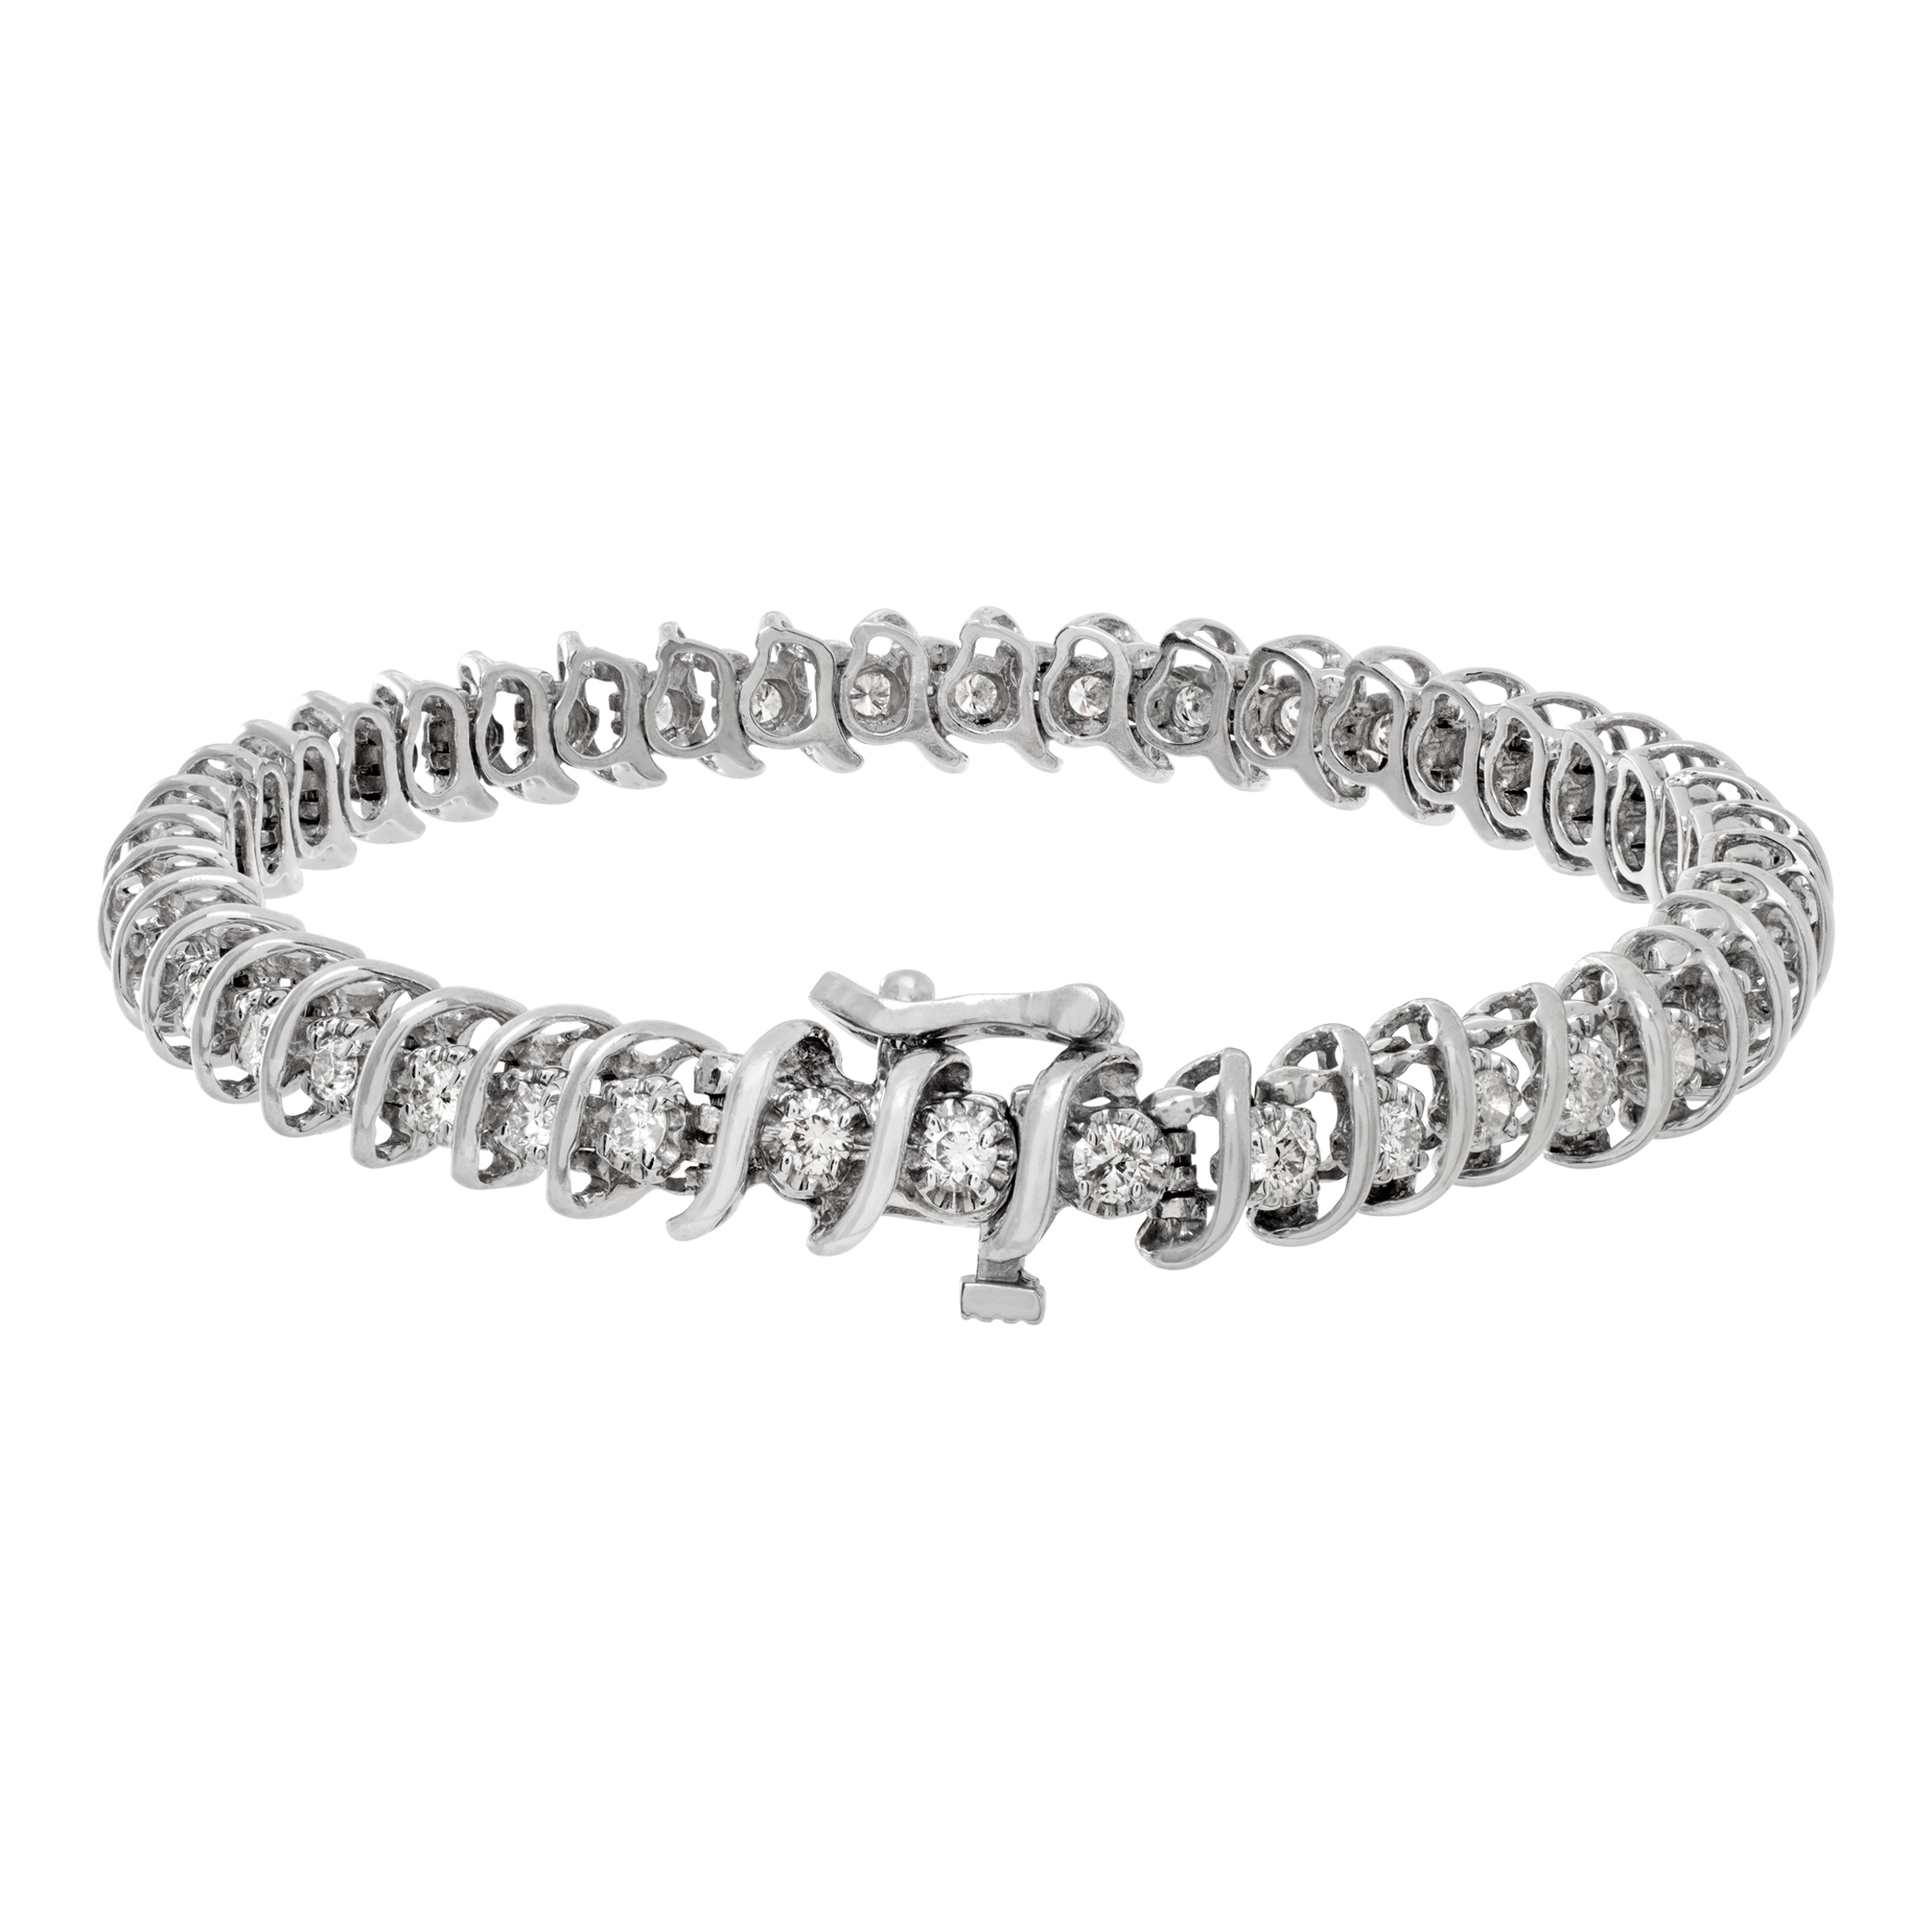 Diamond line bracelet in 14k white gold with approximately 2 carats in round diamonds H-I Color, SI2 Clarity. Length 7.25 inches. (Stones) image 3